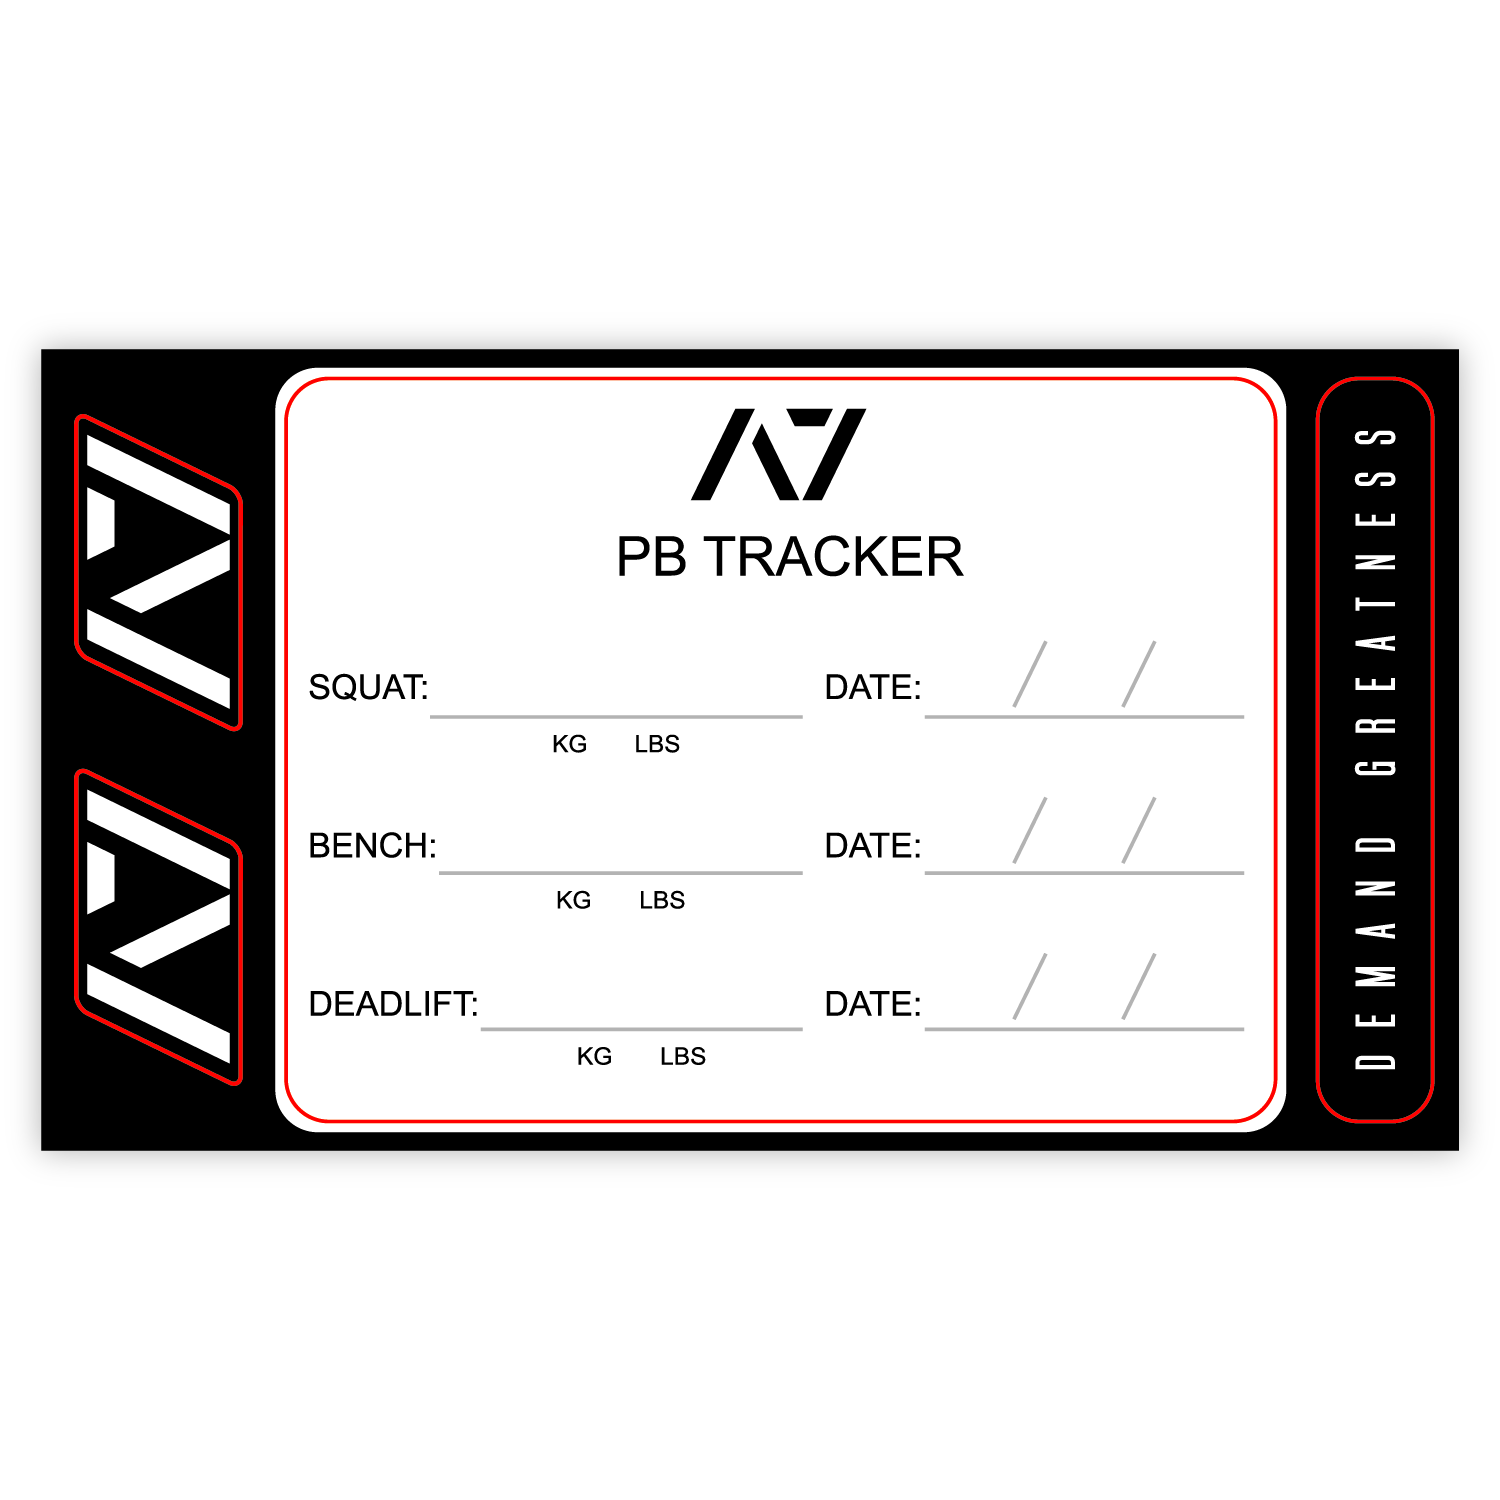 A7 PB Tracker sheet was designed to allow you to document your PRs and progress in your training of Squat, Bench and Deadlift in a convenient sheet that you can attach to your belt, your gym banner or even your home gym wall. It include a small A7 Permanent marker with a keyring to help document our success along with 2 A7 stickers and 1 Demand Greatness sticker.